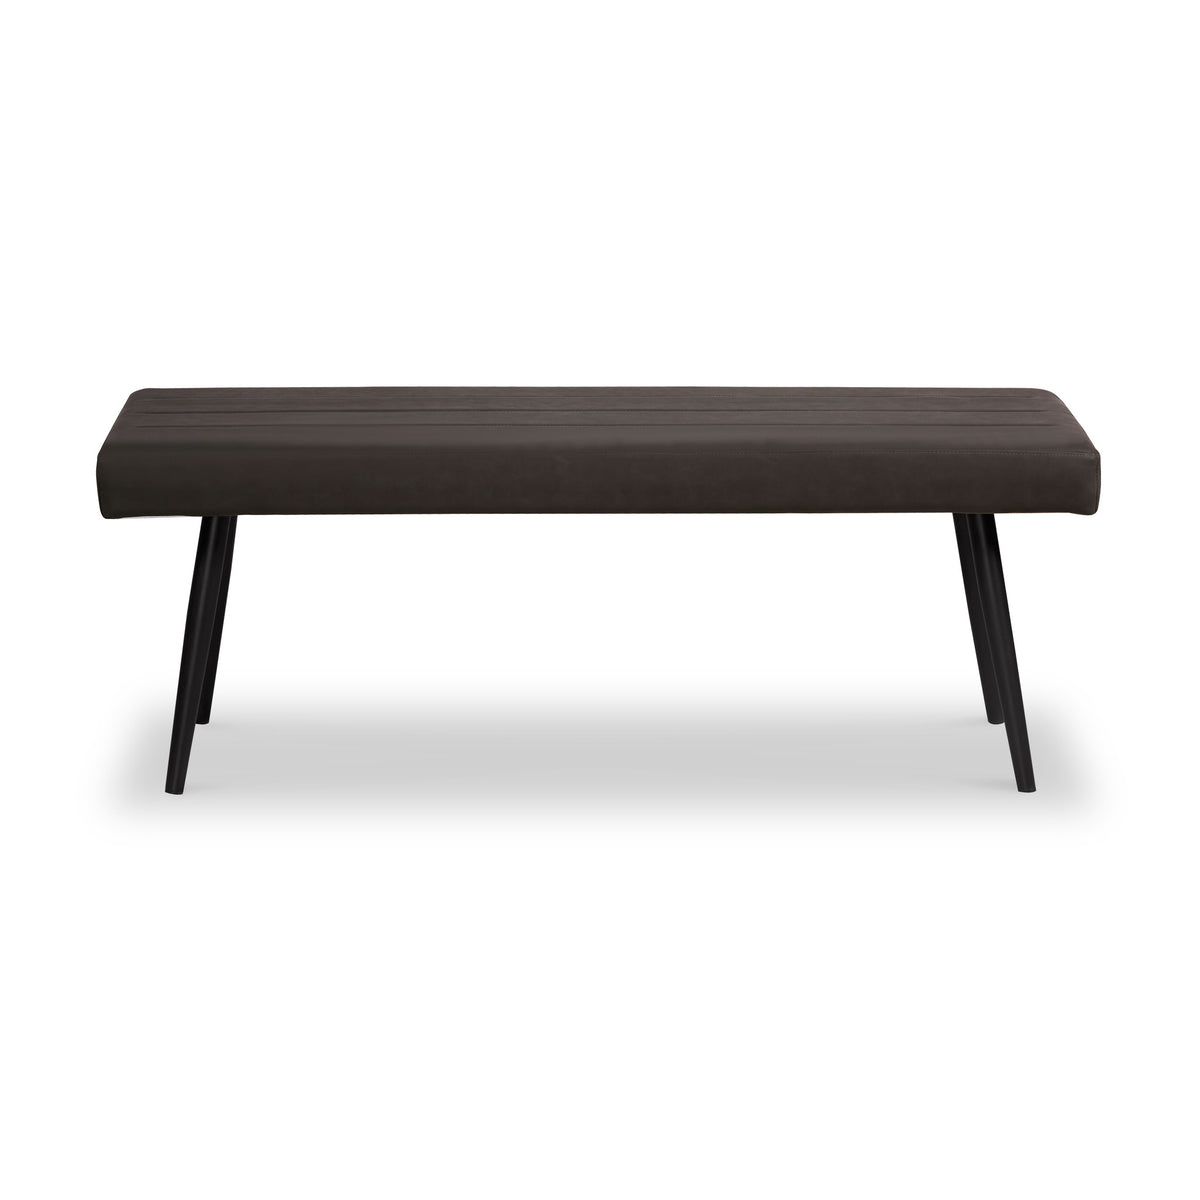 Whitstone Dark Grey Vintage Faux Leather Dining Bench